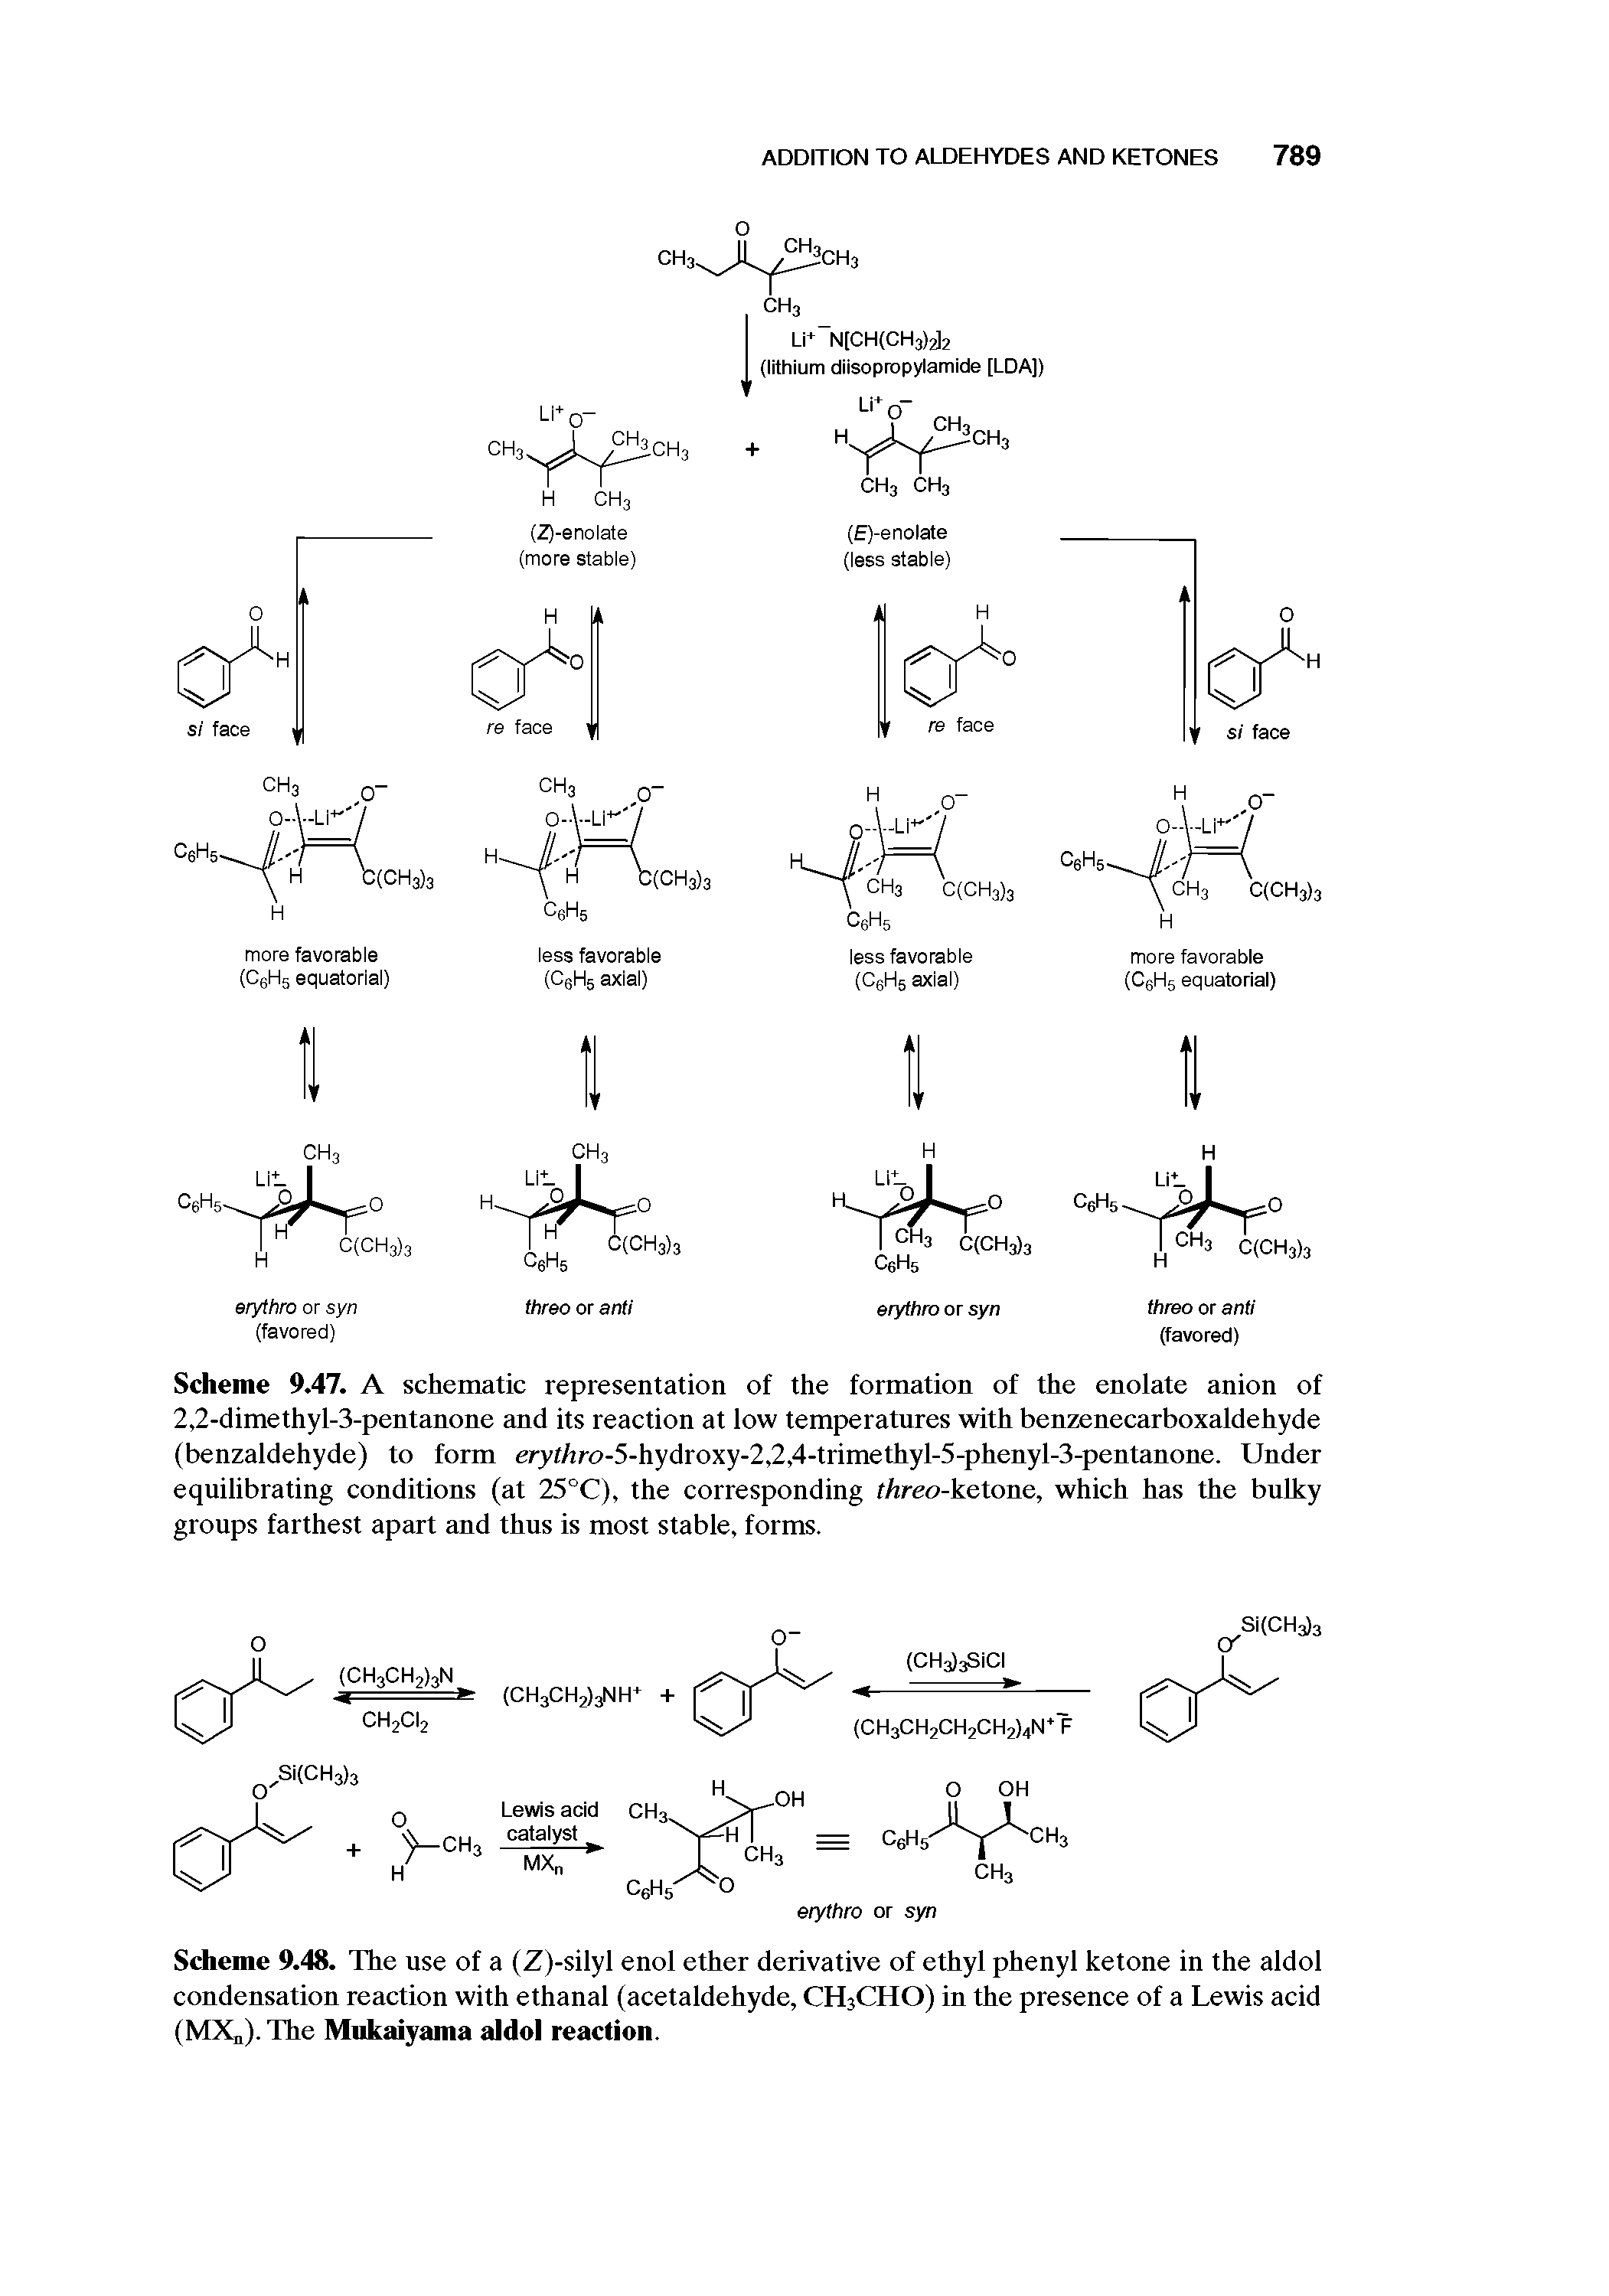 Scheme 9.47. A schematic representation of the formation of the enolate anion of 2,2-dimethyl-3-pentanone and its reaction at low temperatures with benzenecarboxaldehyde (benzaldehyde) to form eryt/tro-5-hydroxy-2,2,4-trimethyl-5-phenyl-3-pentanone. Under equilibrating conditions (at 25°C), the corresponding threo-ketone, which has the bulky groups farthest apart and thus is most stable, forms.